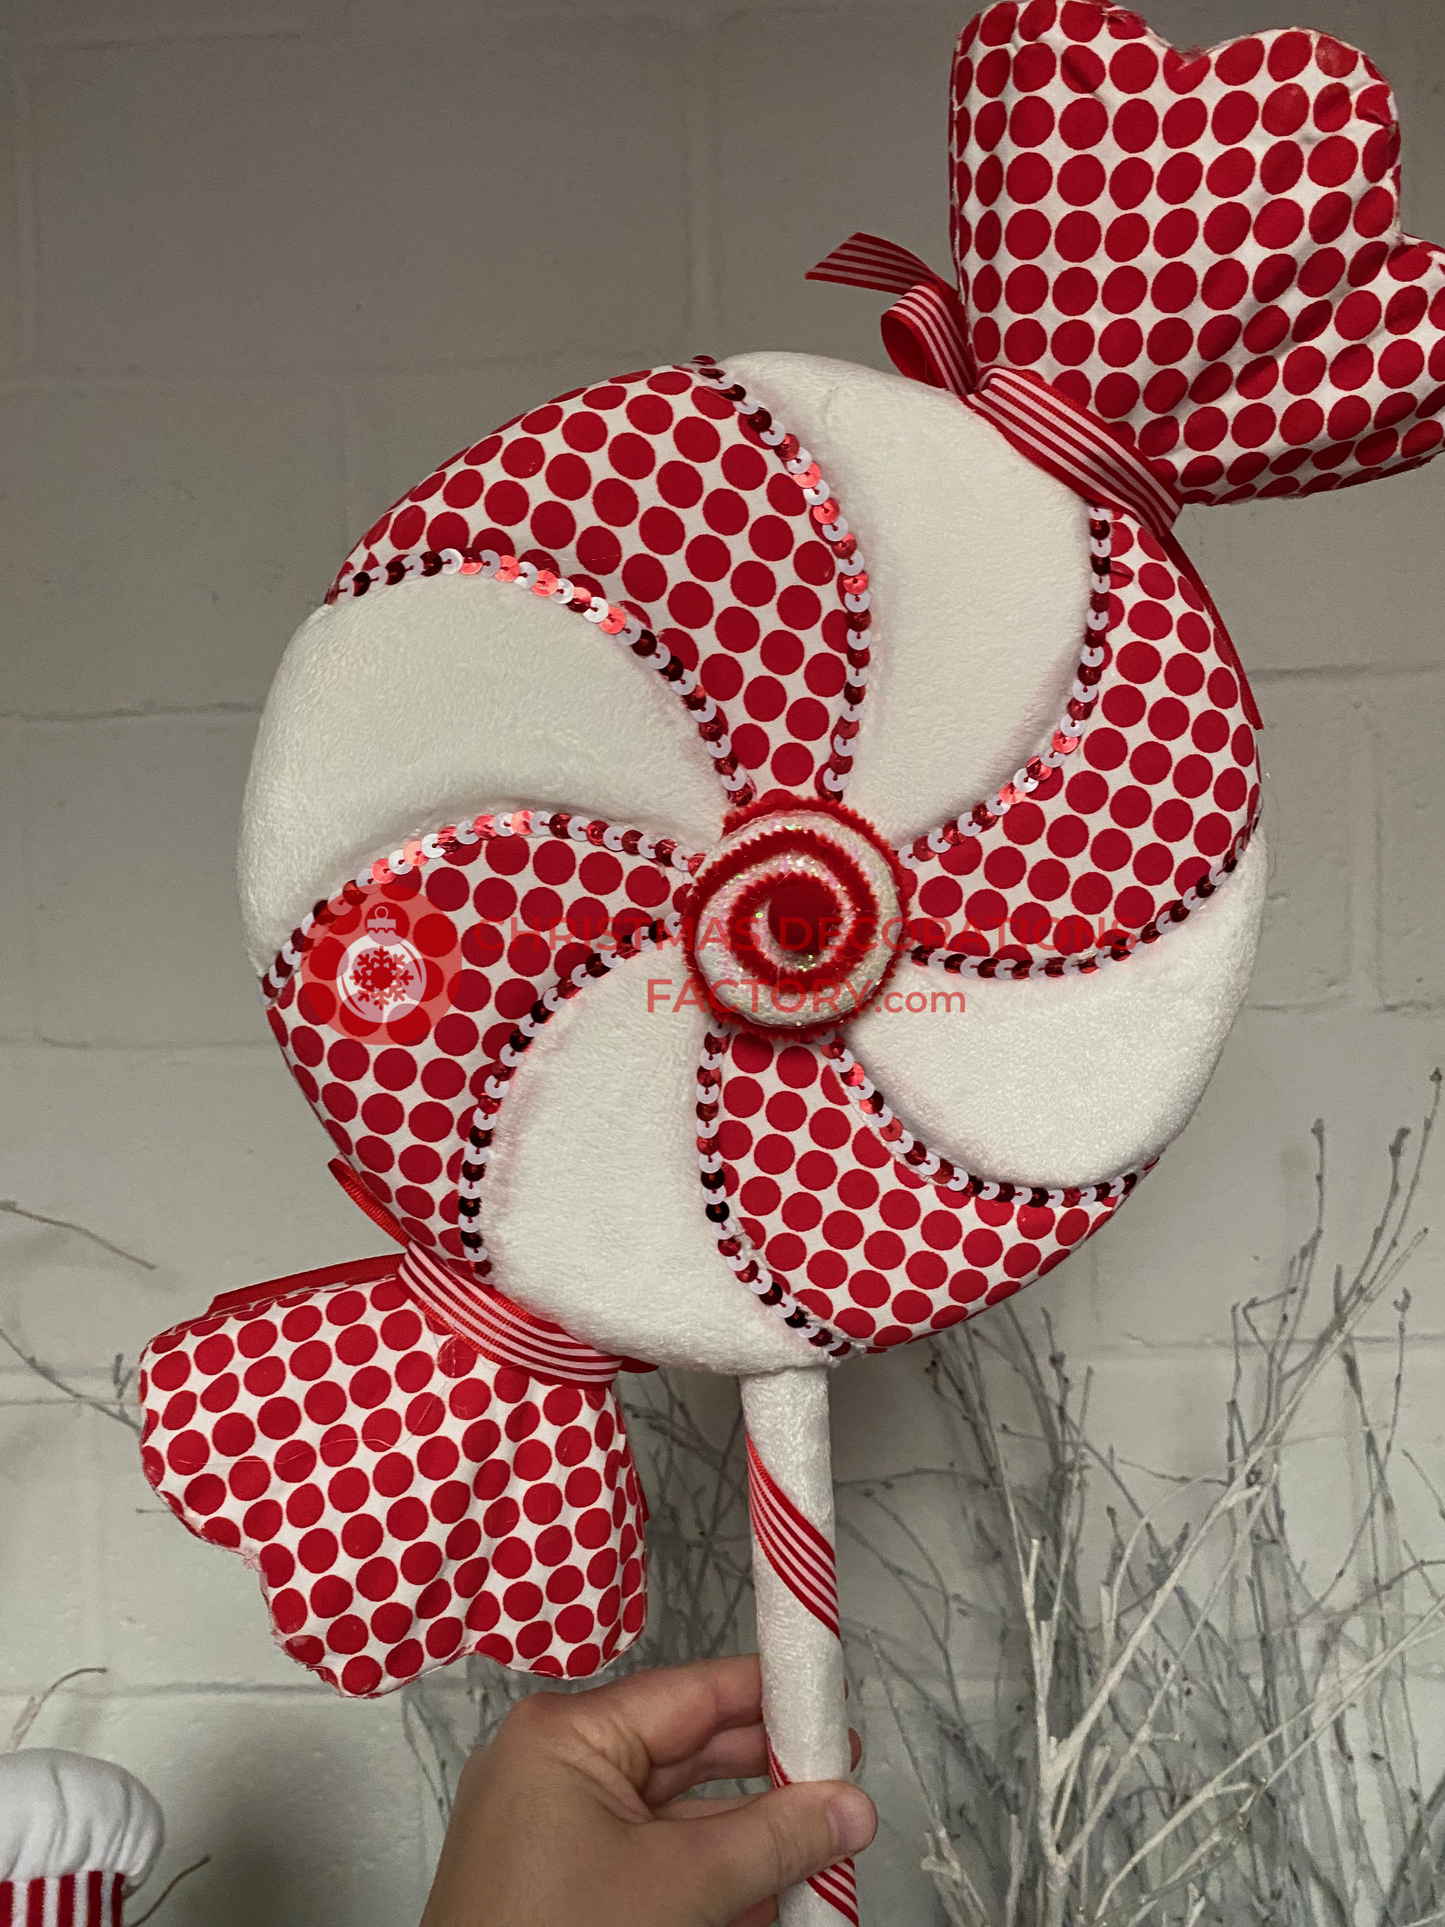 69cm Fabric Red and White Candy Polka Dot Swirl Sweet